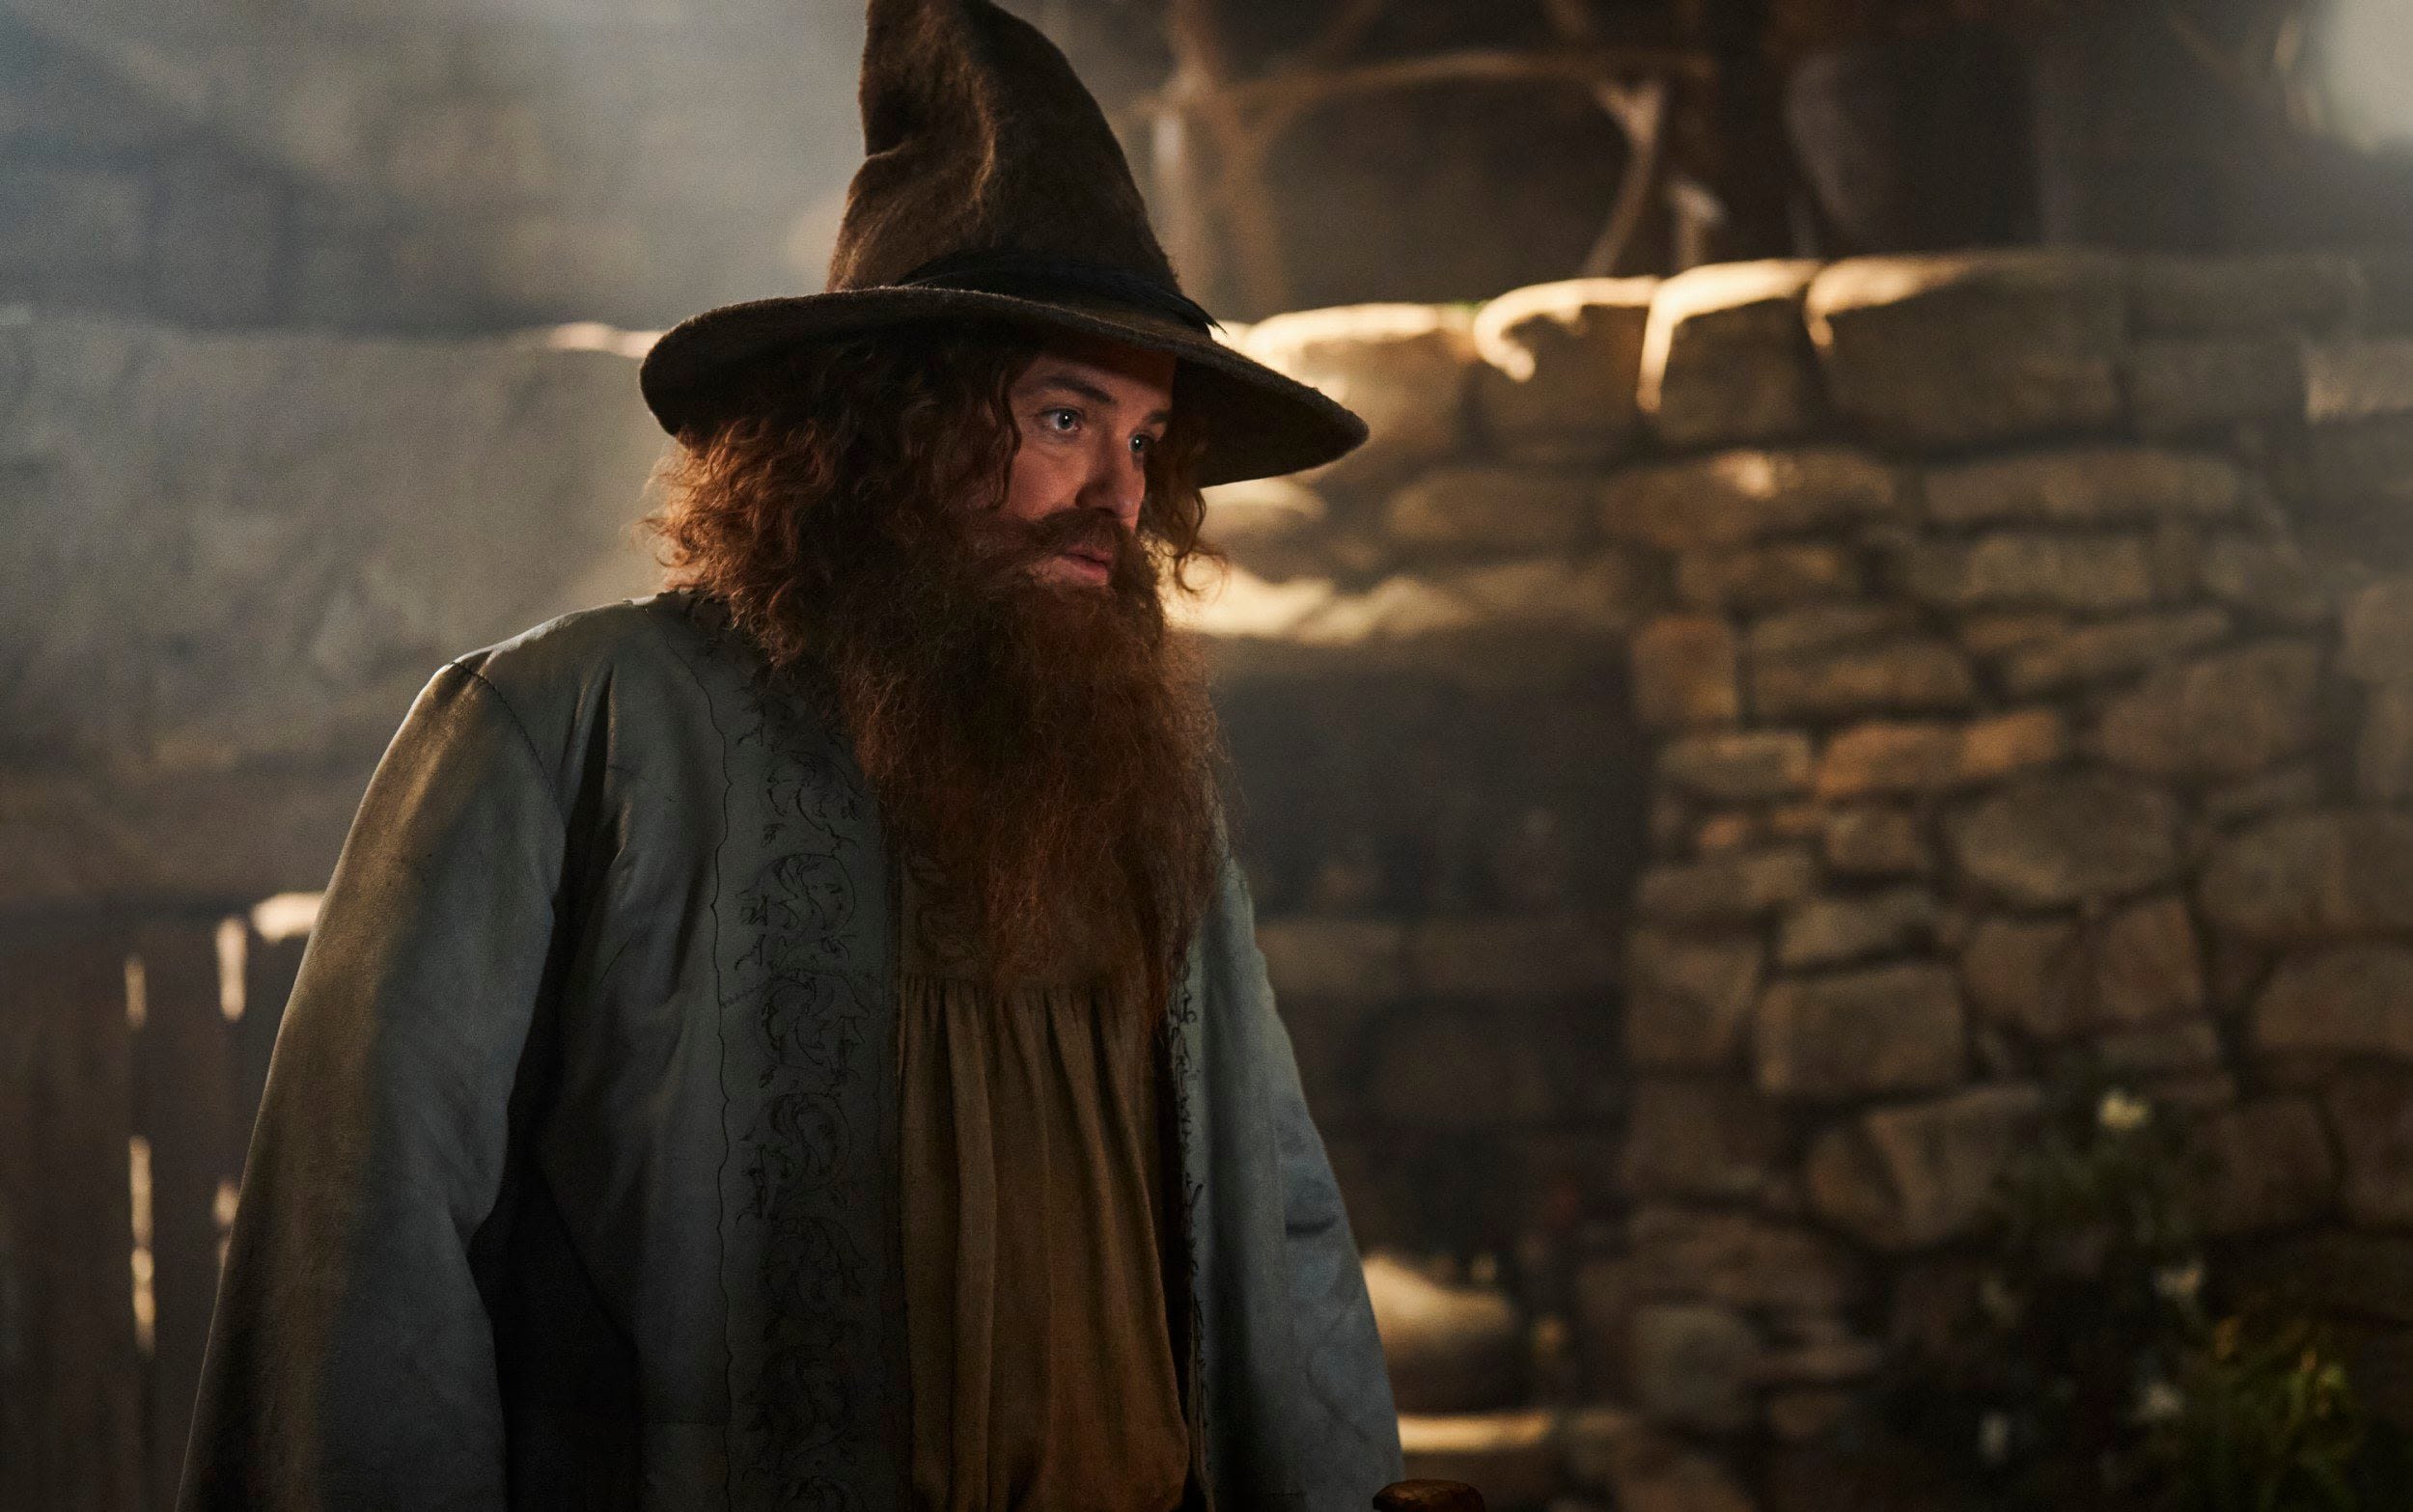 The Tom Bombadil enigma: will Amazon’s Rings of Power solve Tolkien’s greatest mystery?